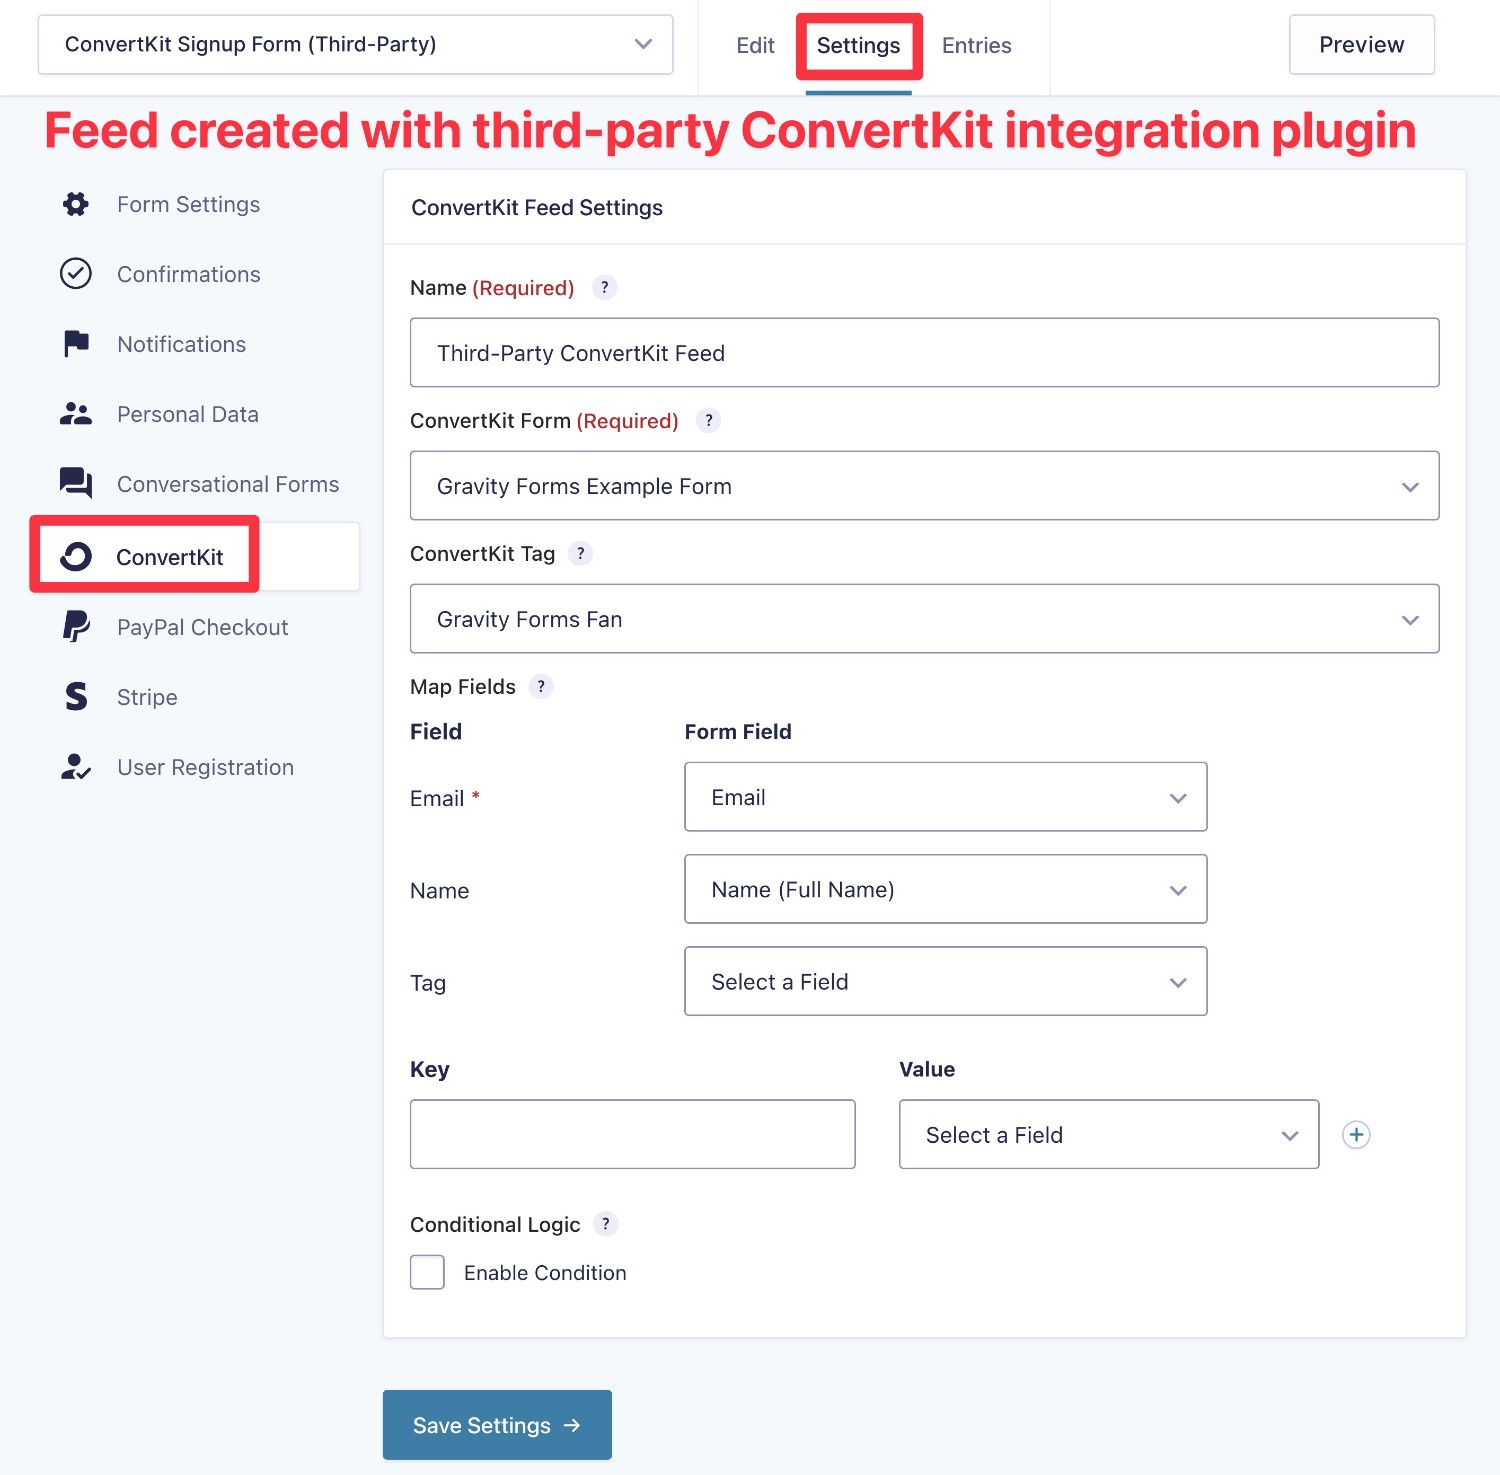 A ConvertKit feed with the third-party plugin